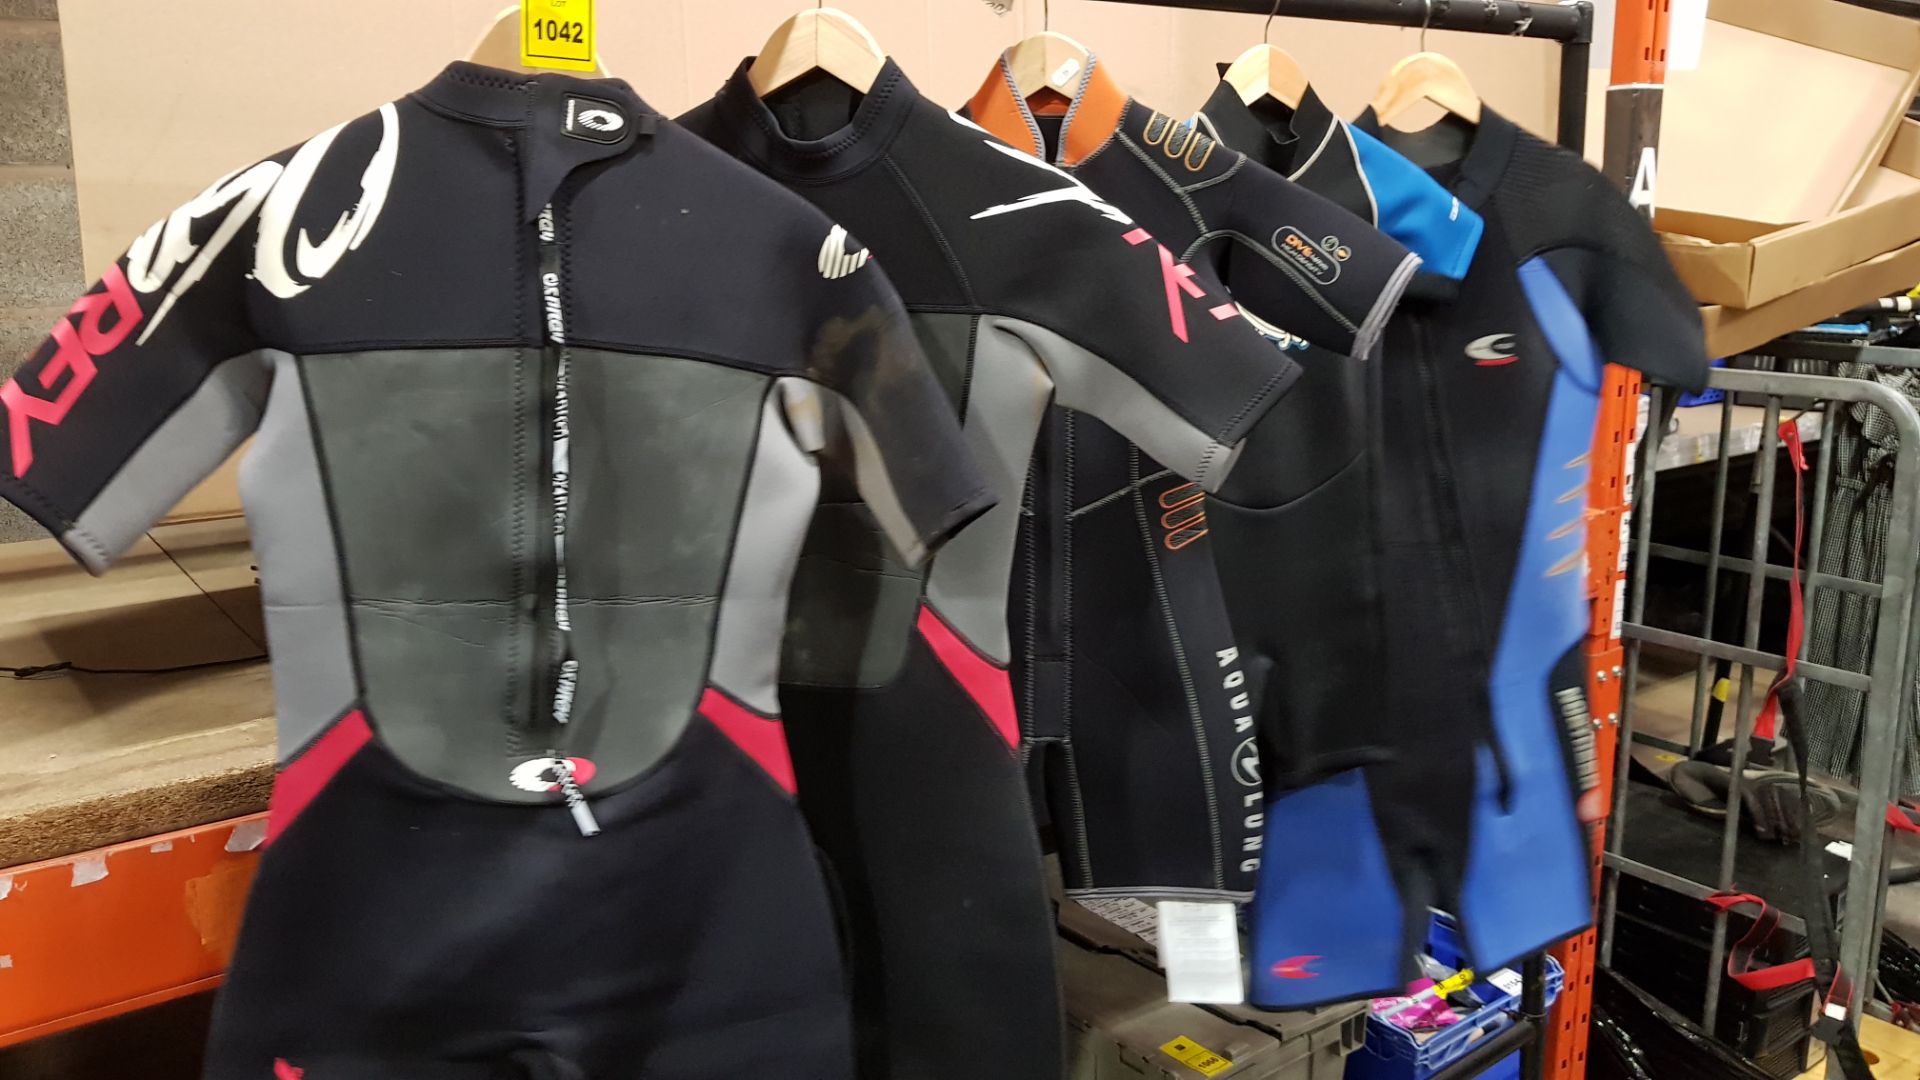 11 X SCUBA DIVING WET SUITS I.E NALU, OSPREY AND OCEAN PRO VARIOUS SIZES (EX-HIRE)